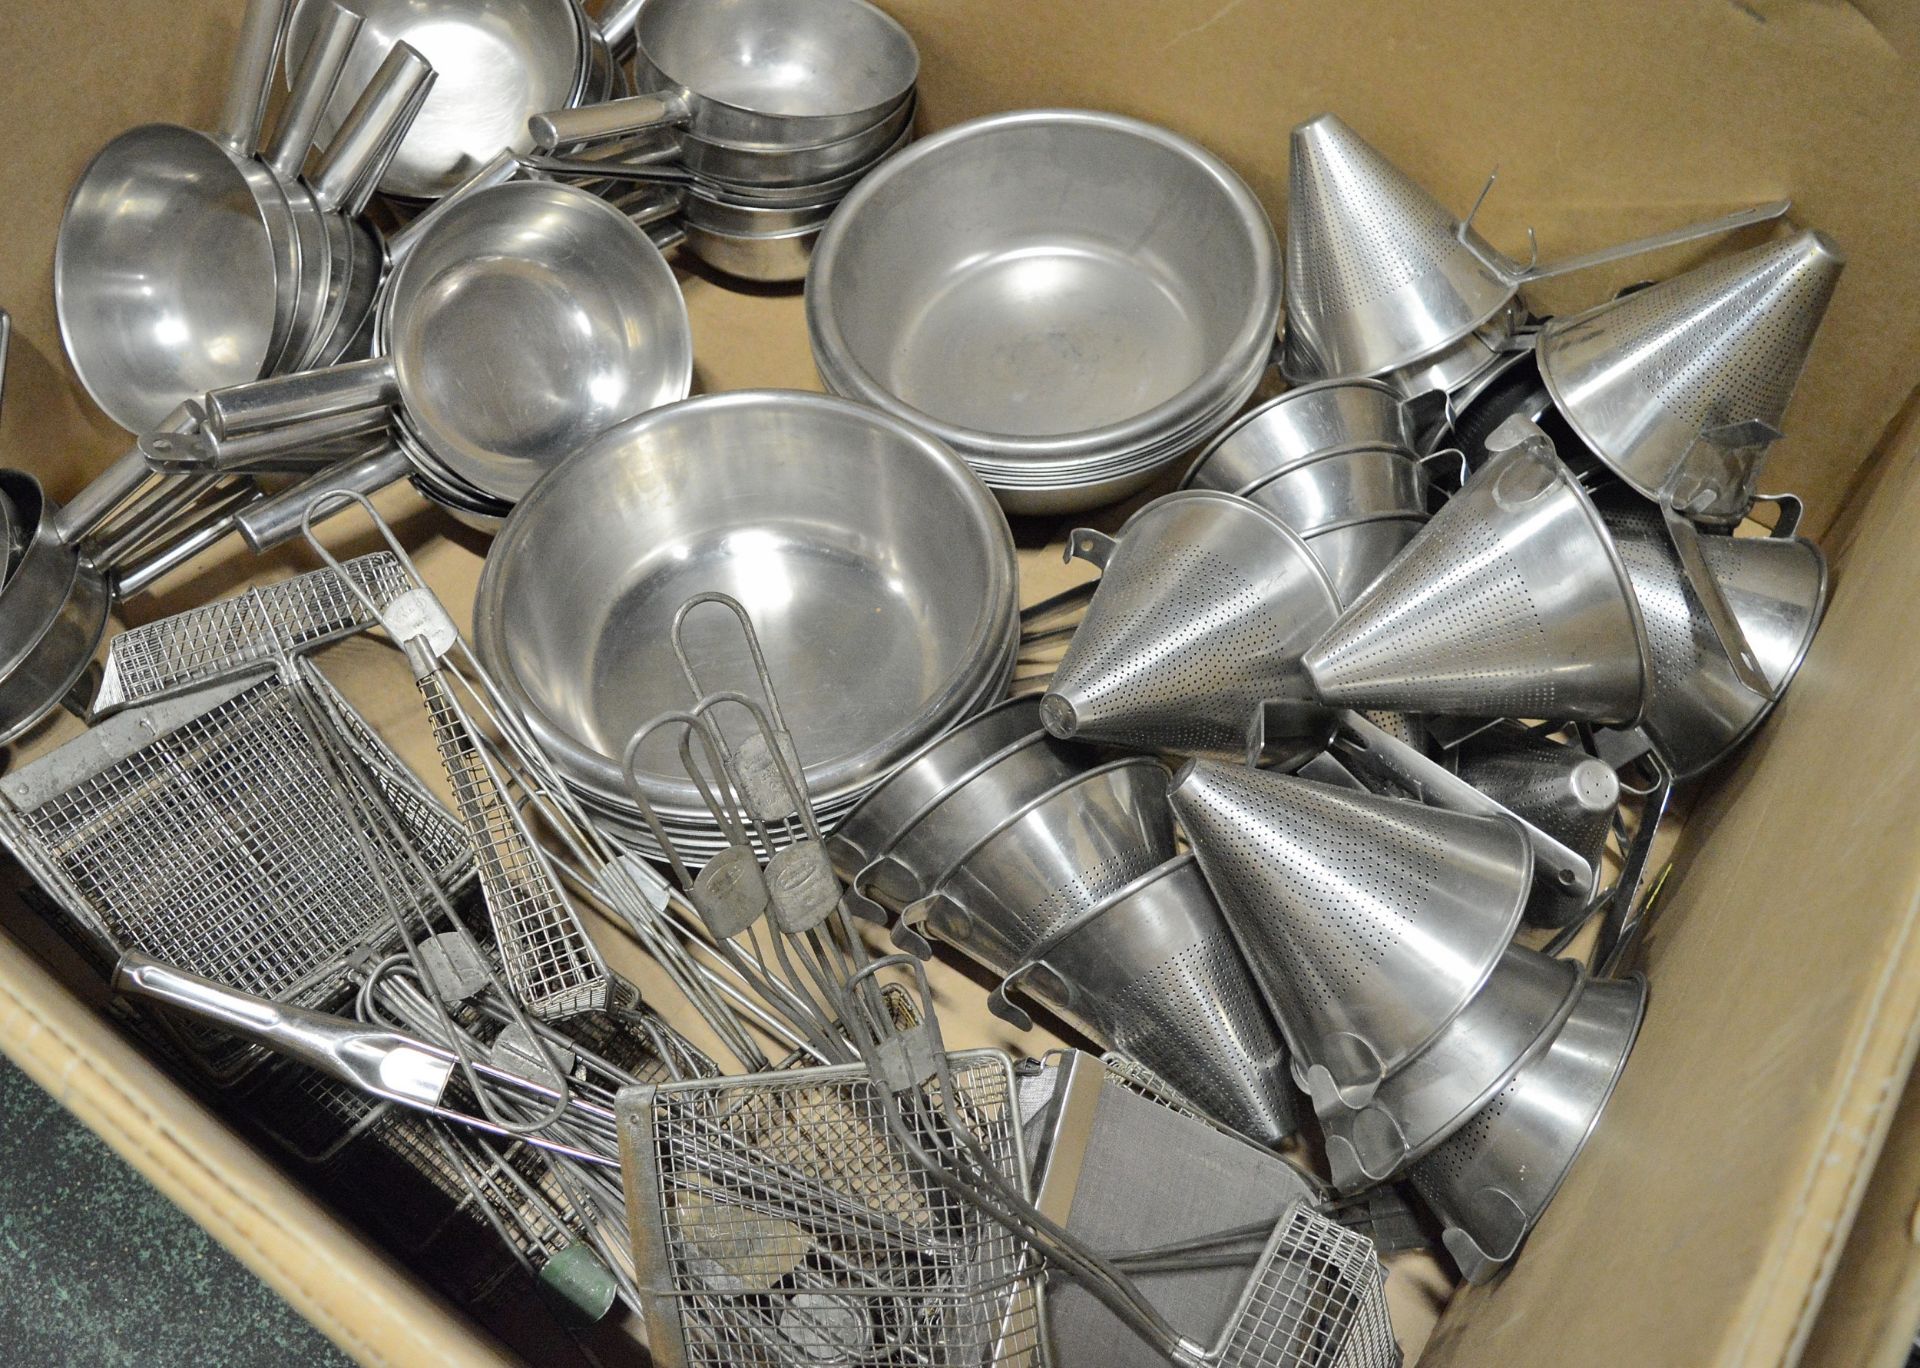 Various Catering - Stainless Basin, Mixing Bowl, Stainless Sieves, chip scoops - Image 2 of 3